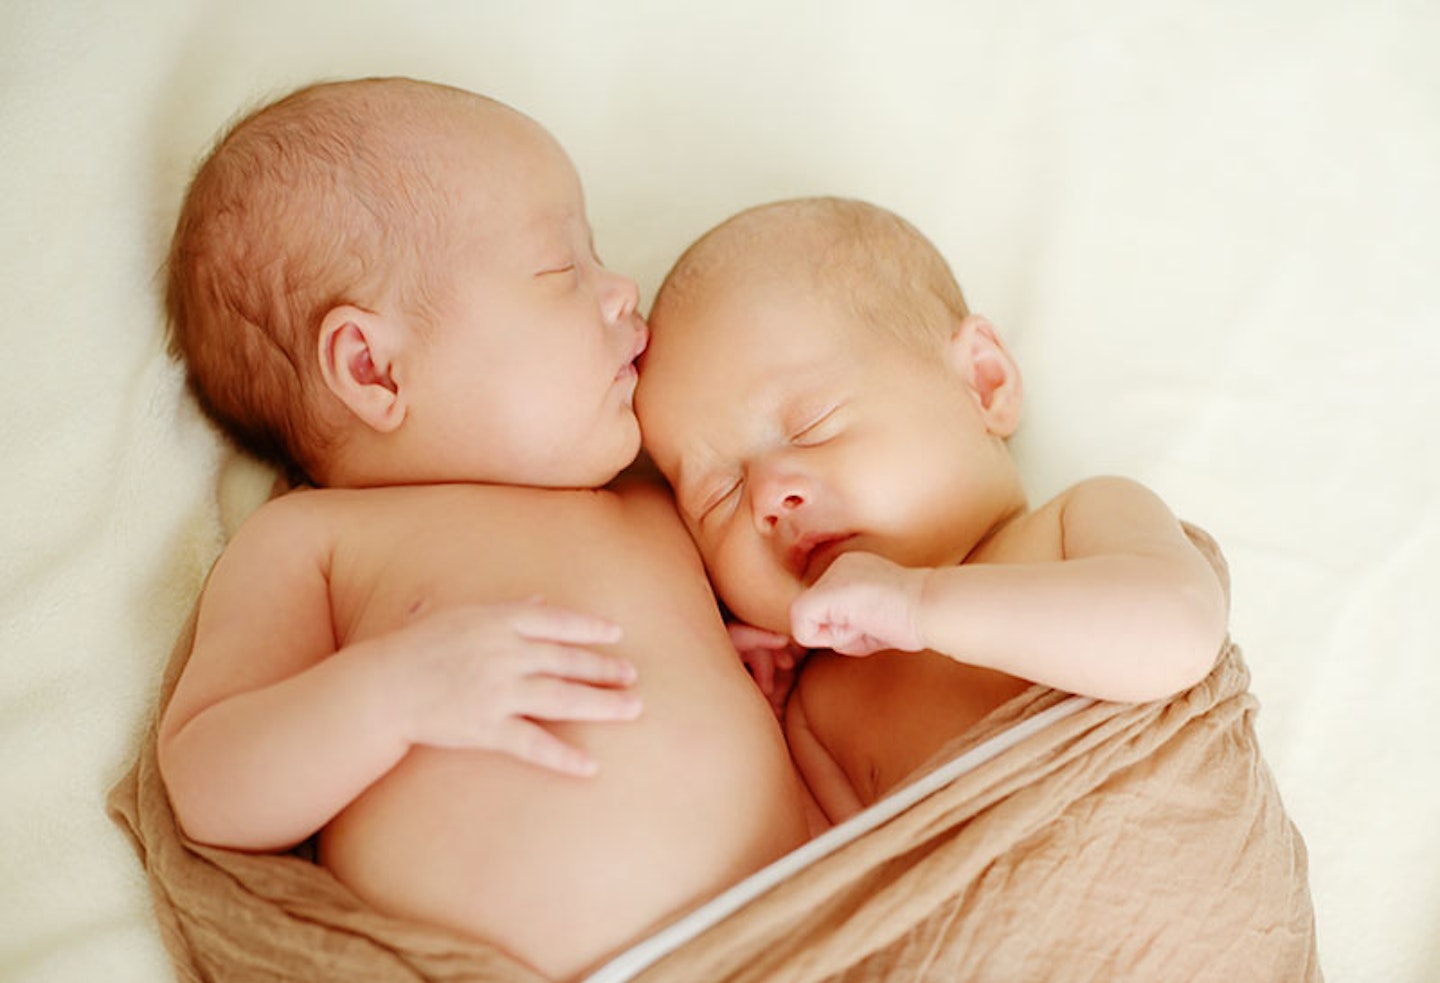 Breastmilk is different for boys and girls